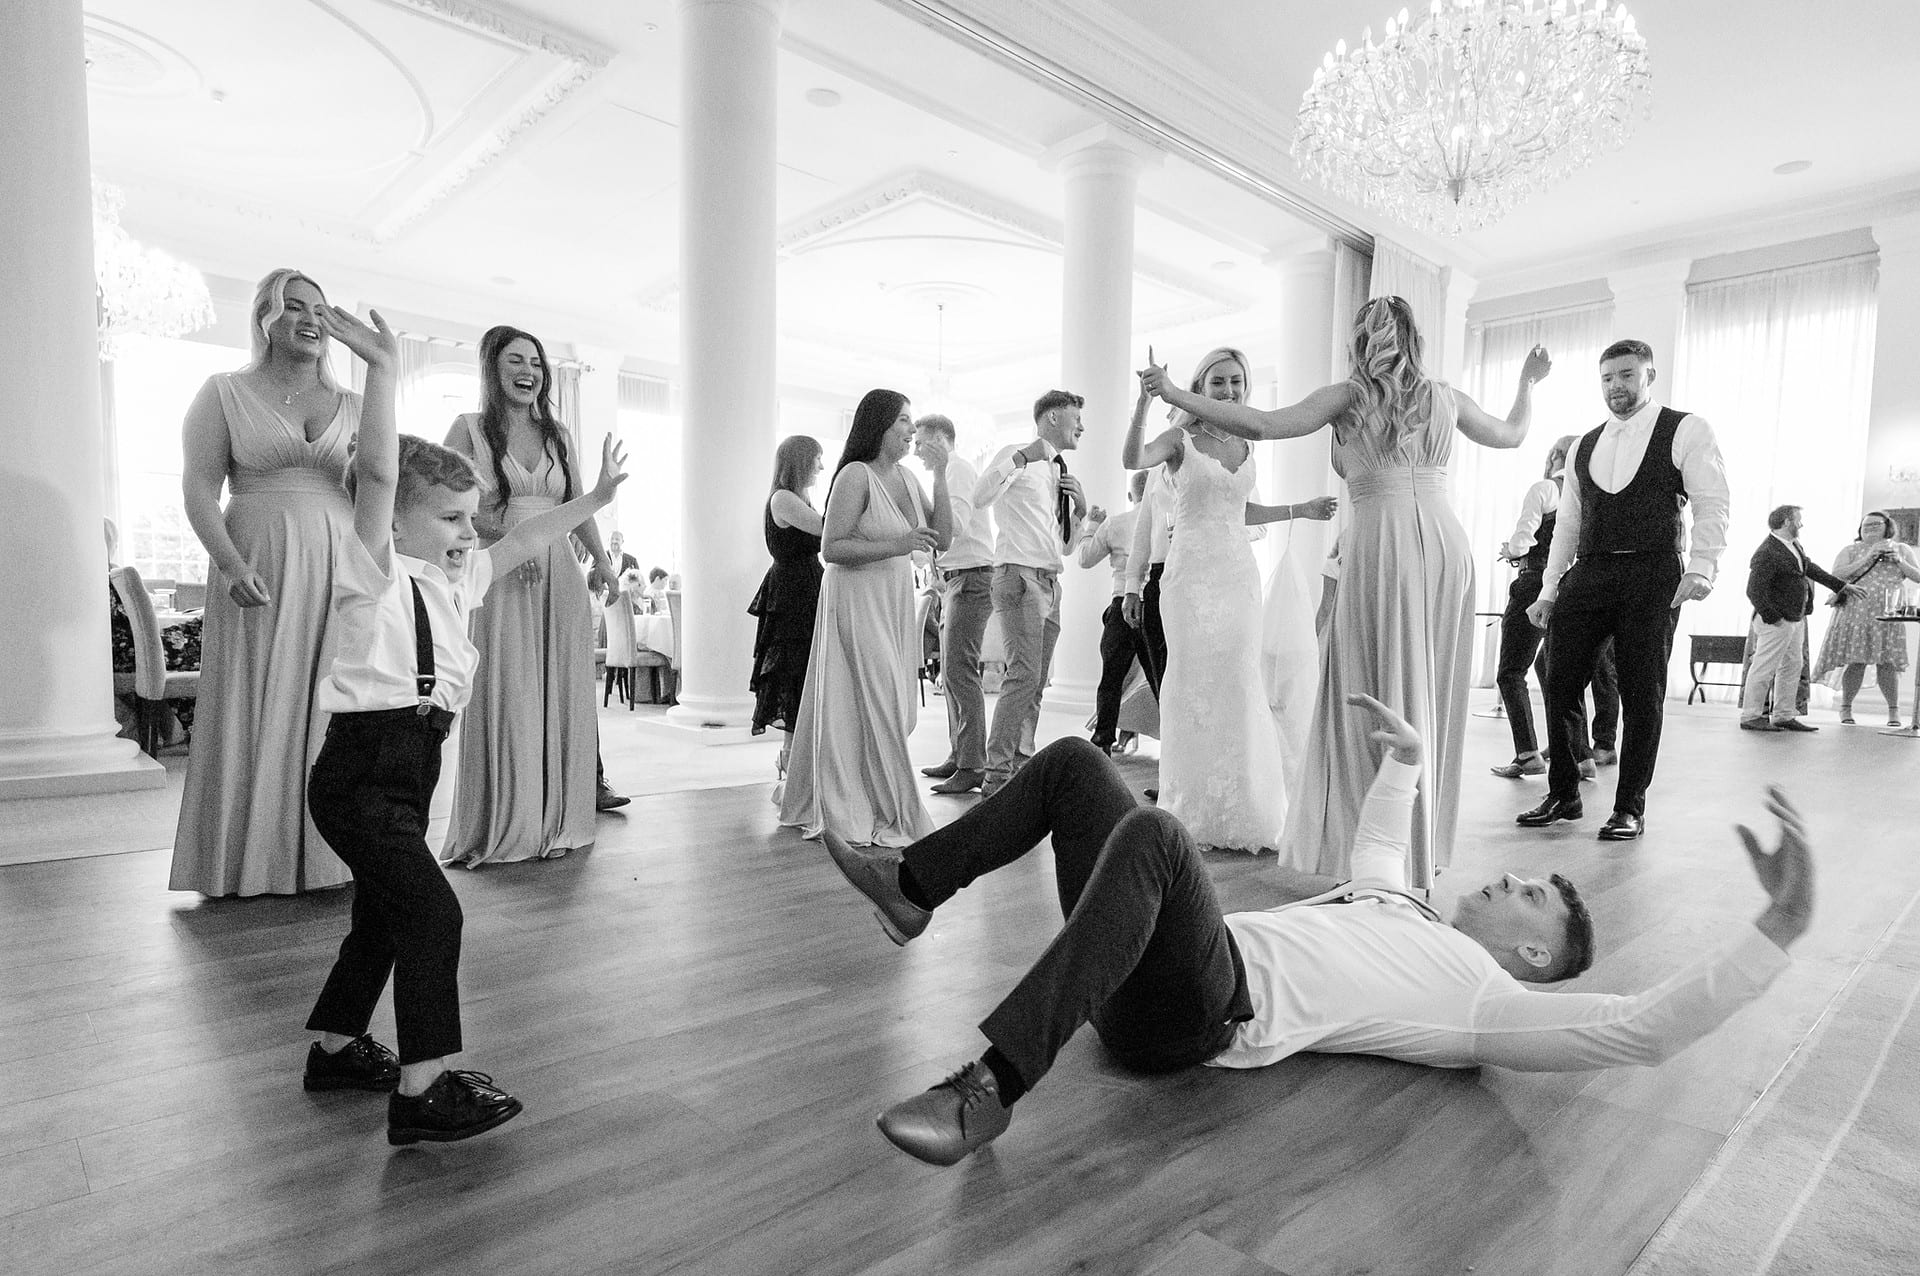 Pageboy taking a run to balance on top of a wedding guest is laying on the floor ready to catch him